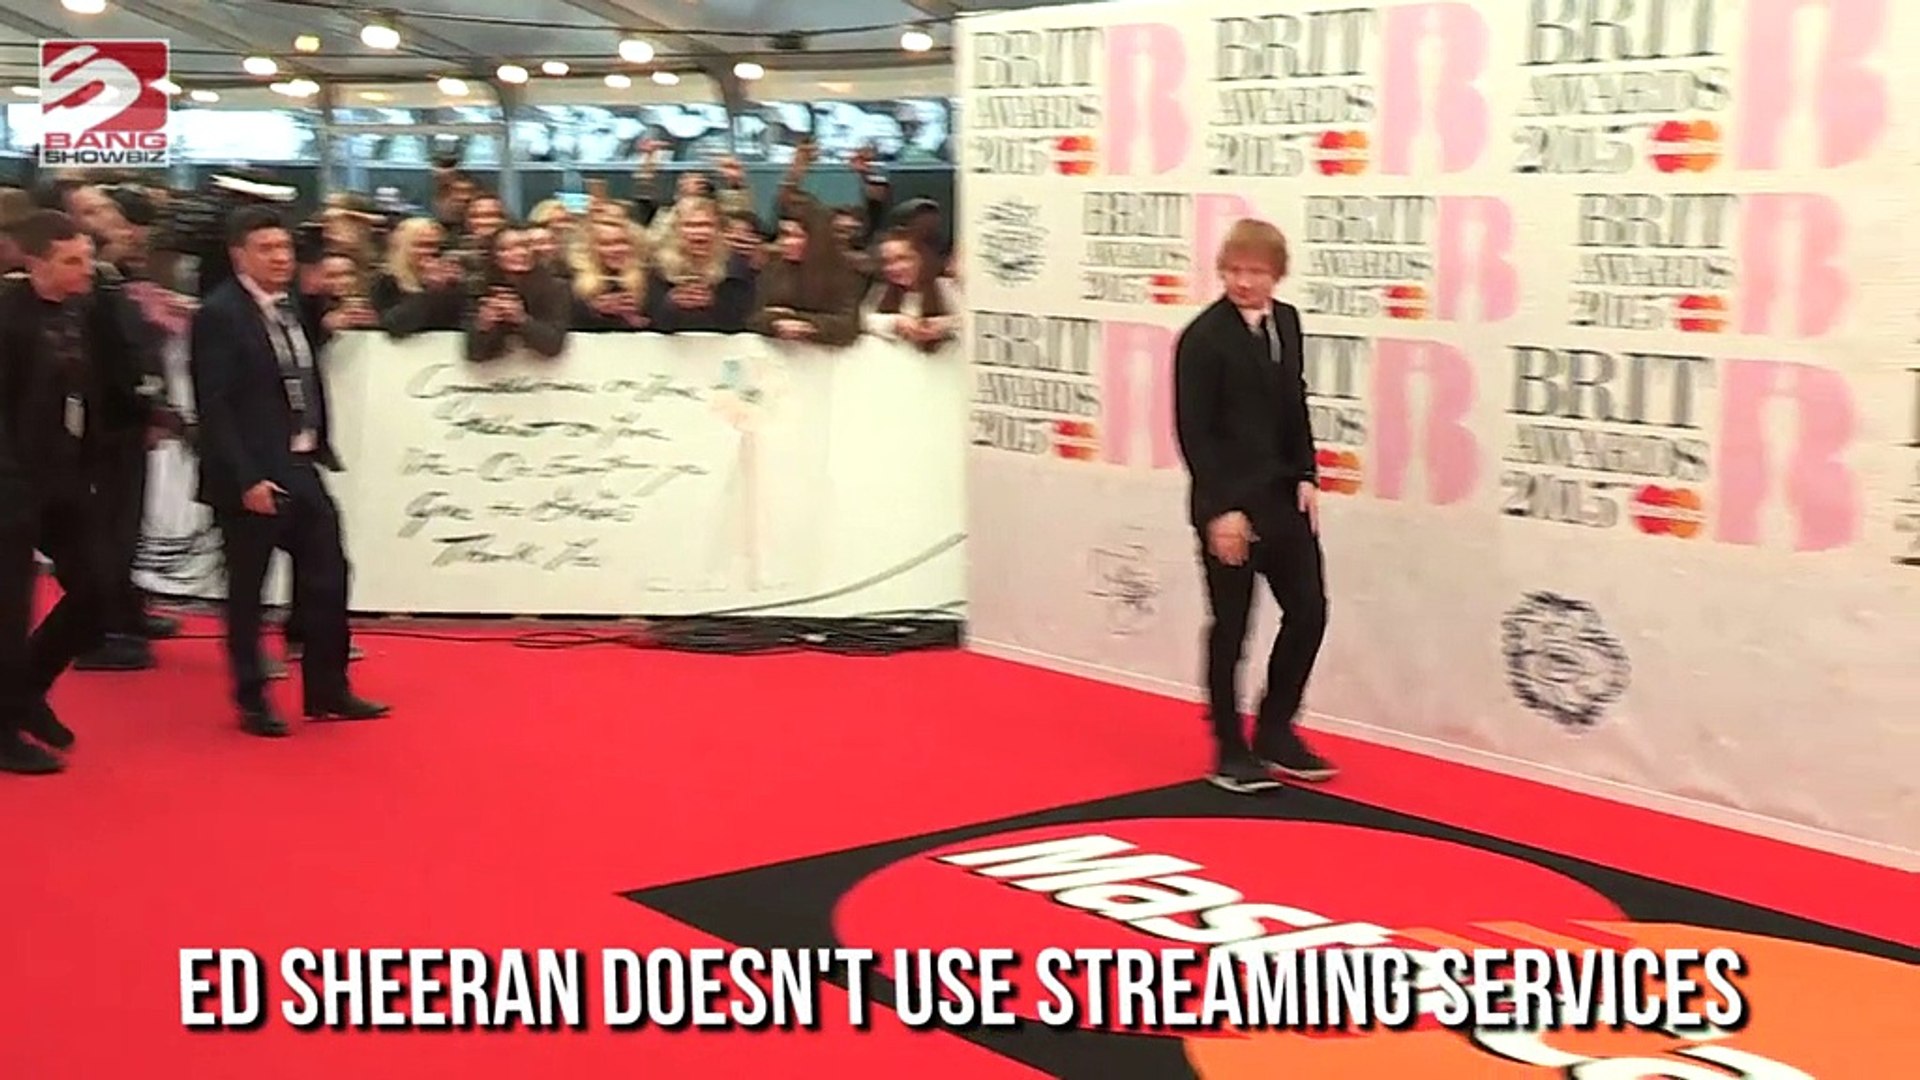 Ed Sheeran doesn't use streaming services